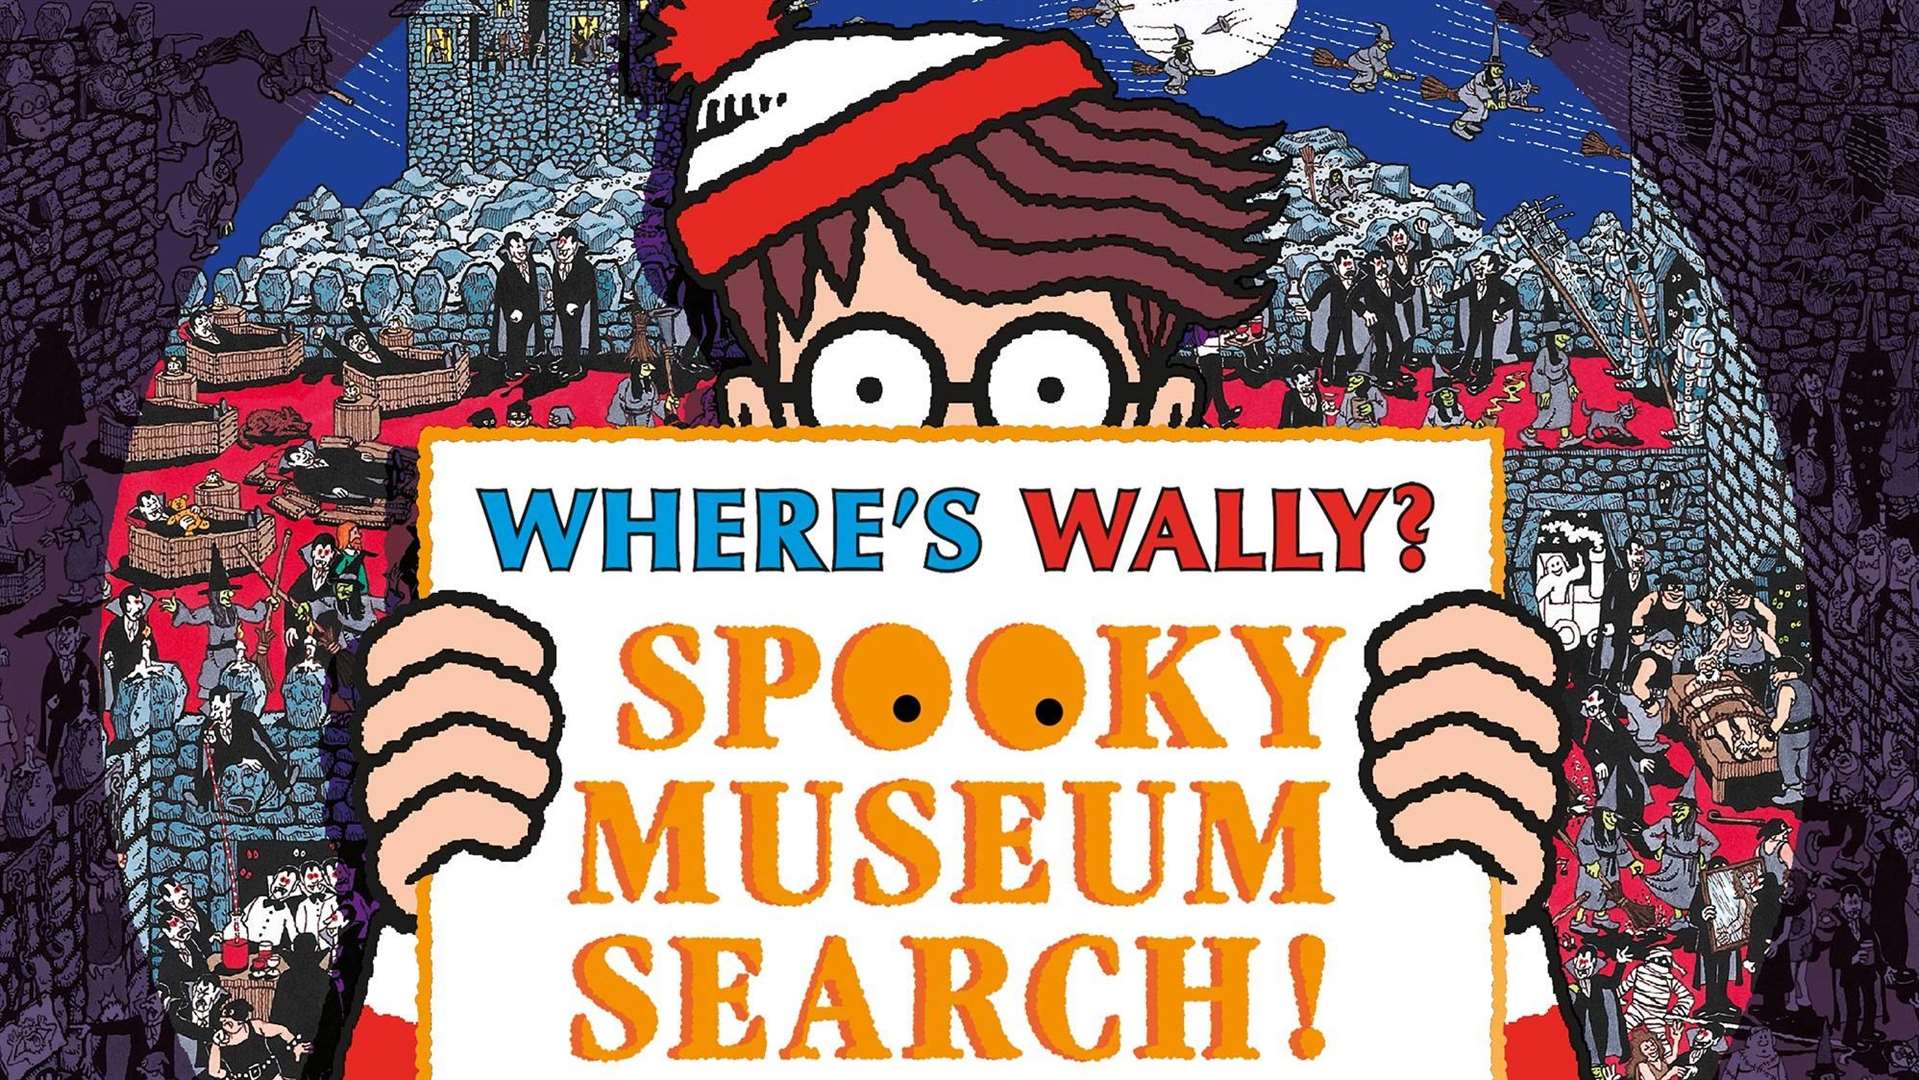 Where's Wally Spooky Museum Search is happening this weekend